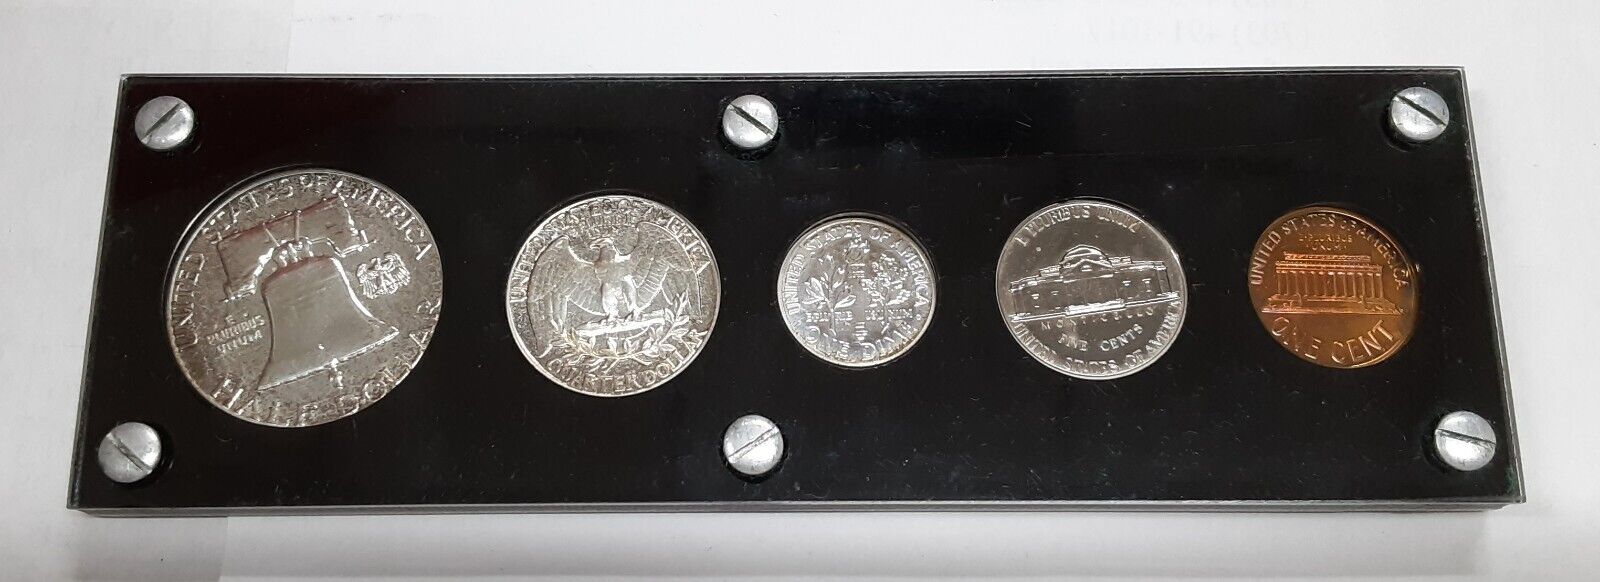 1960 Proof Year Set 5 Silver Coins w/Half, Quarter, & Dime in Black Holder (B)